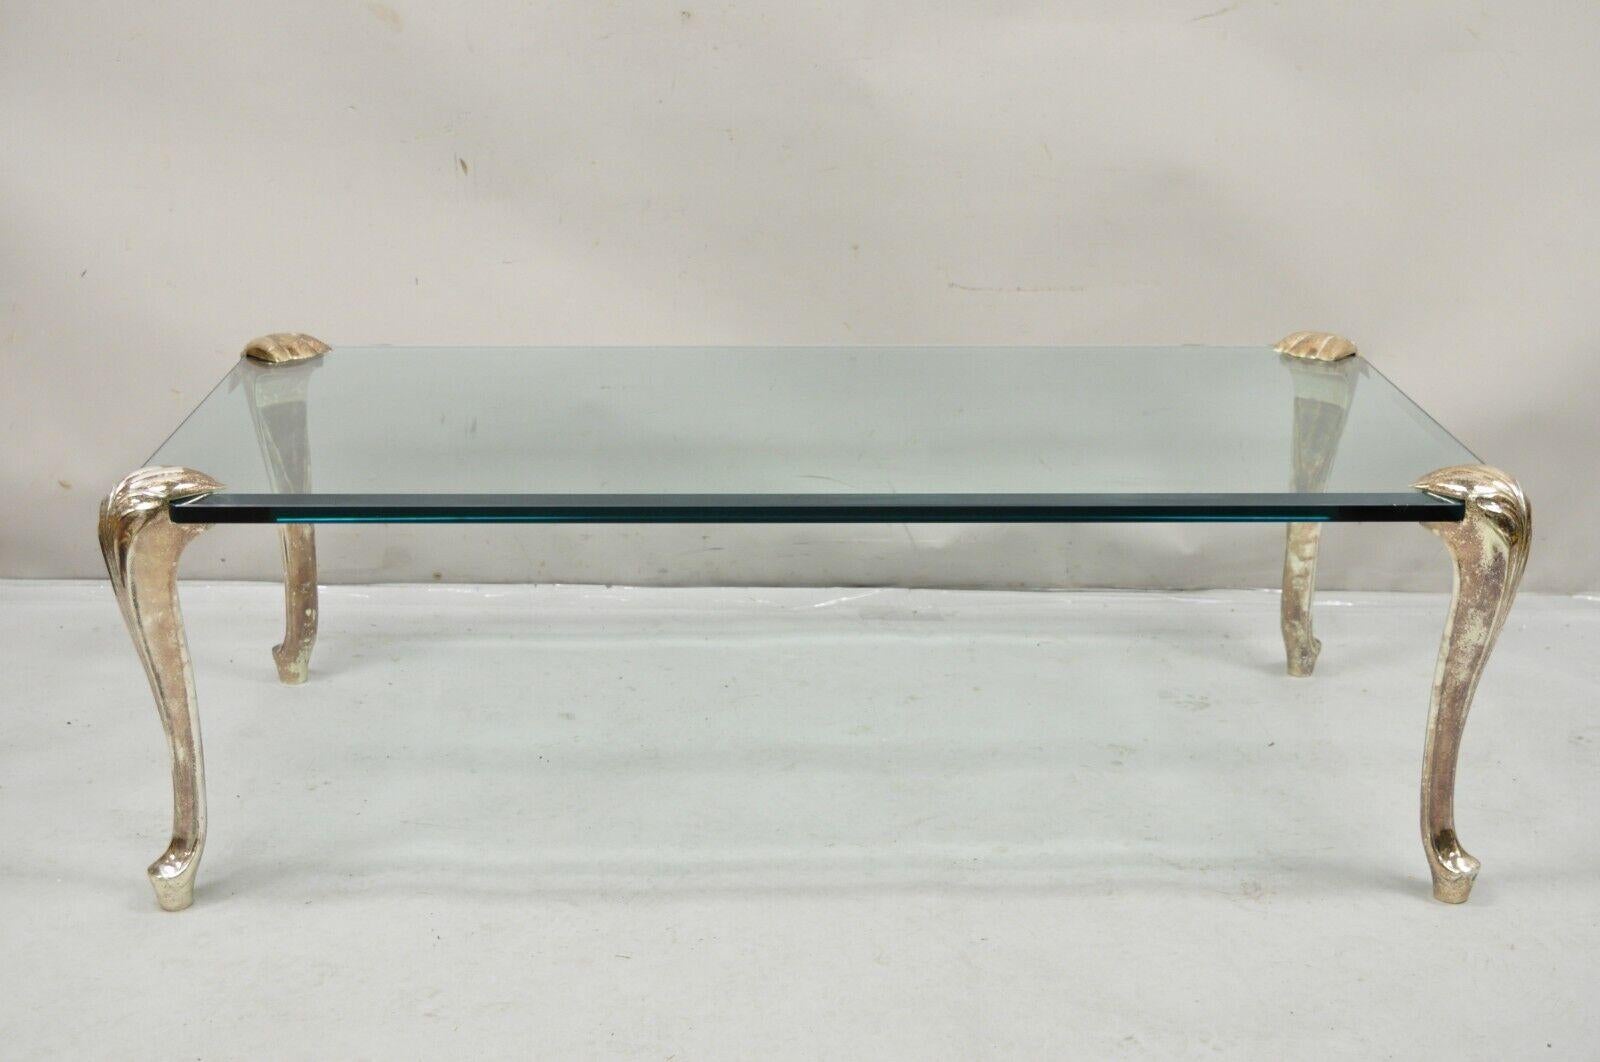 Vintage French Hollywood  Regency Beveled Glass Bronze Cabriole Leg Coffee Table. Item features intentional manufacturer distressed finish to cast bronze cabriole legs, thick beveled clear glass top, high quality craftsmanship, great style and form.